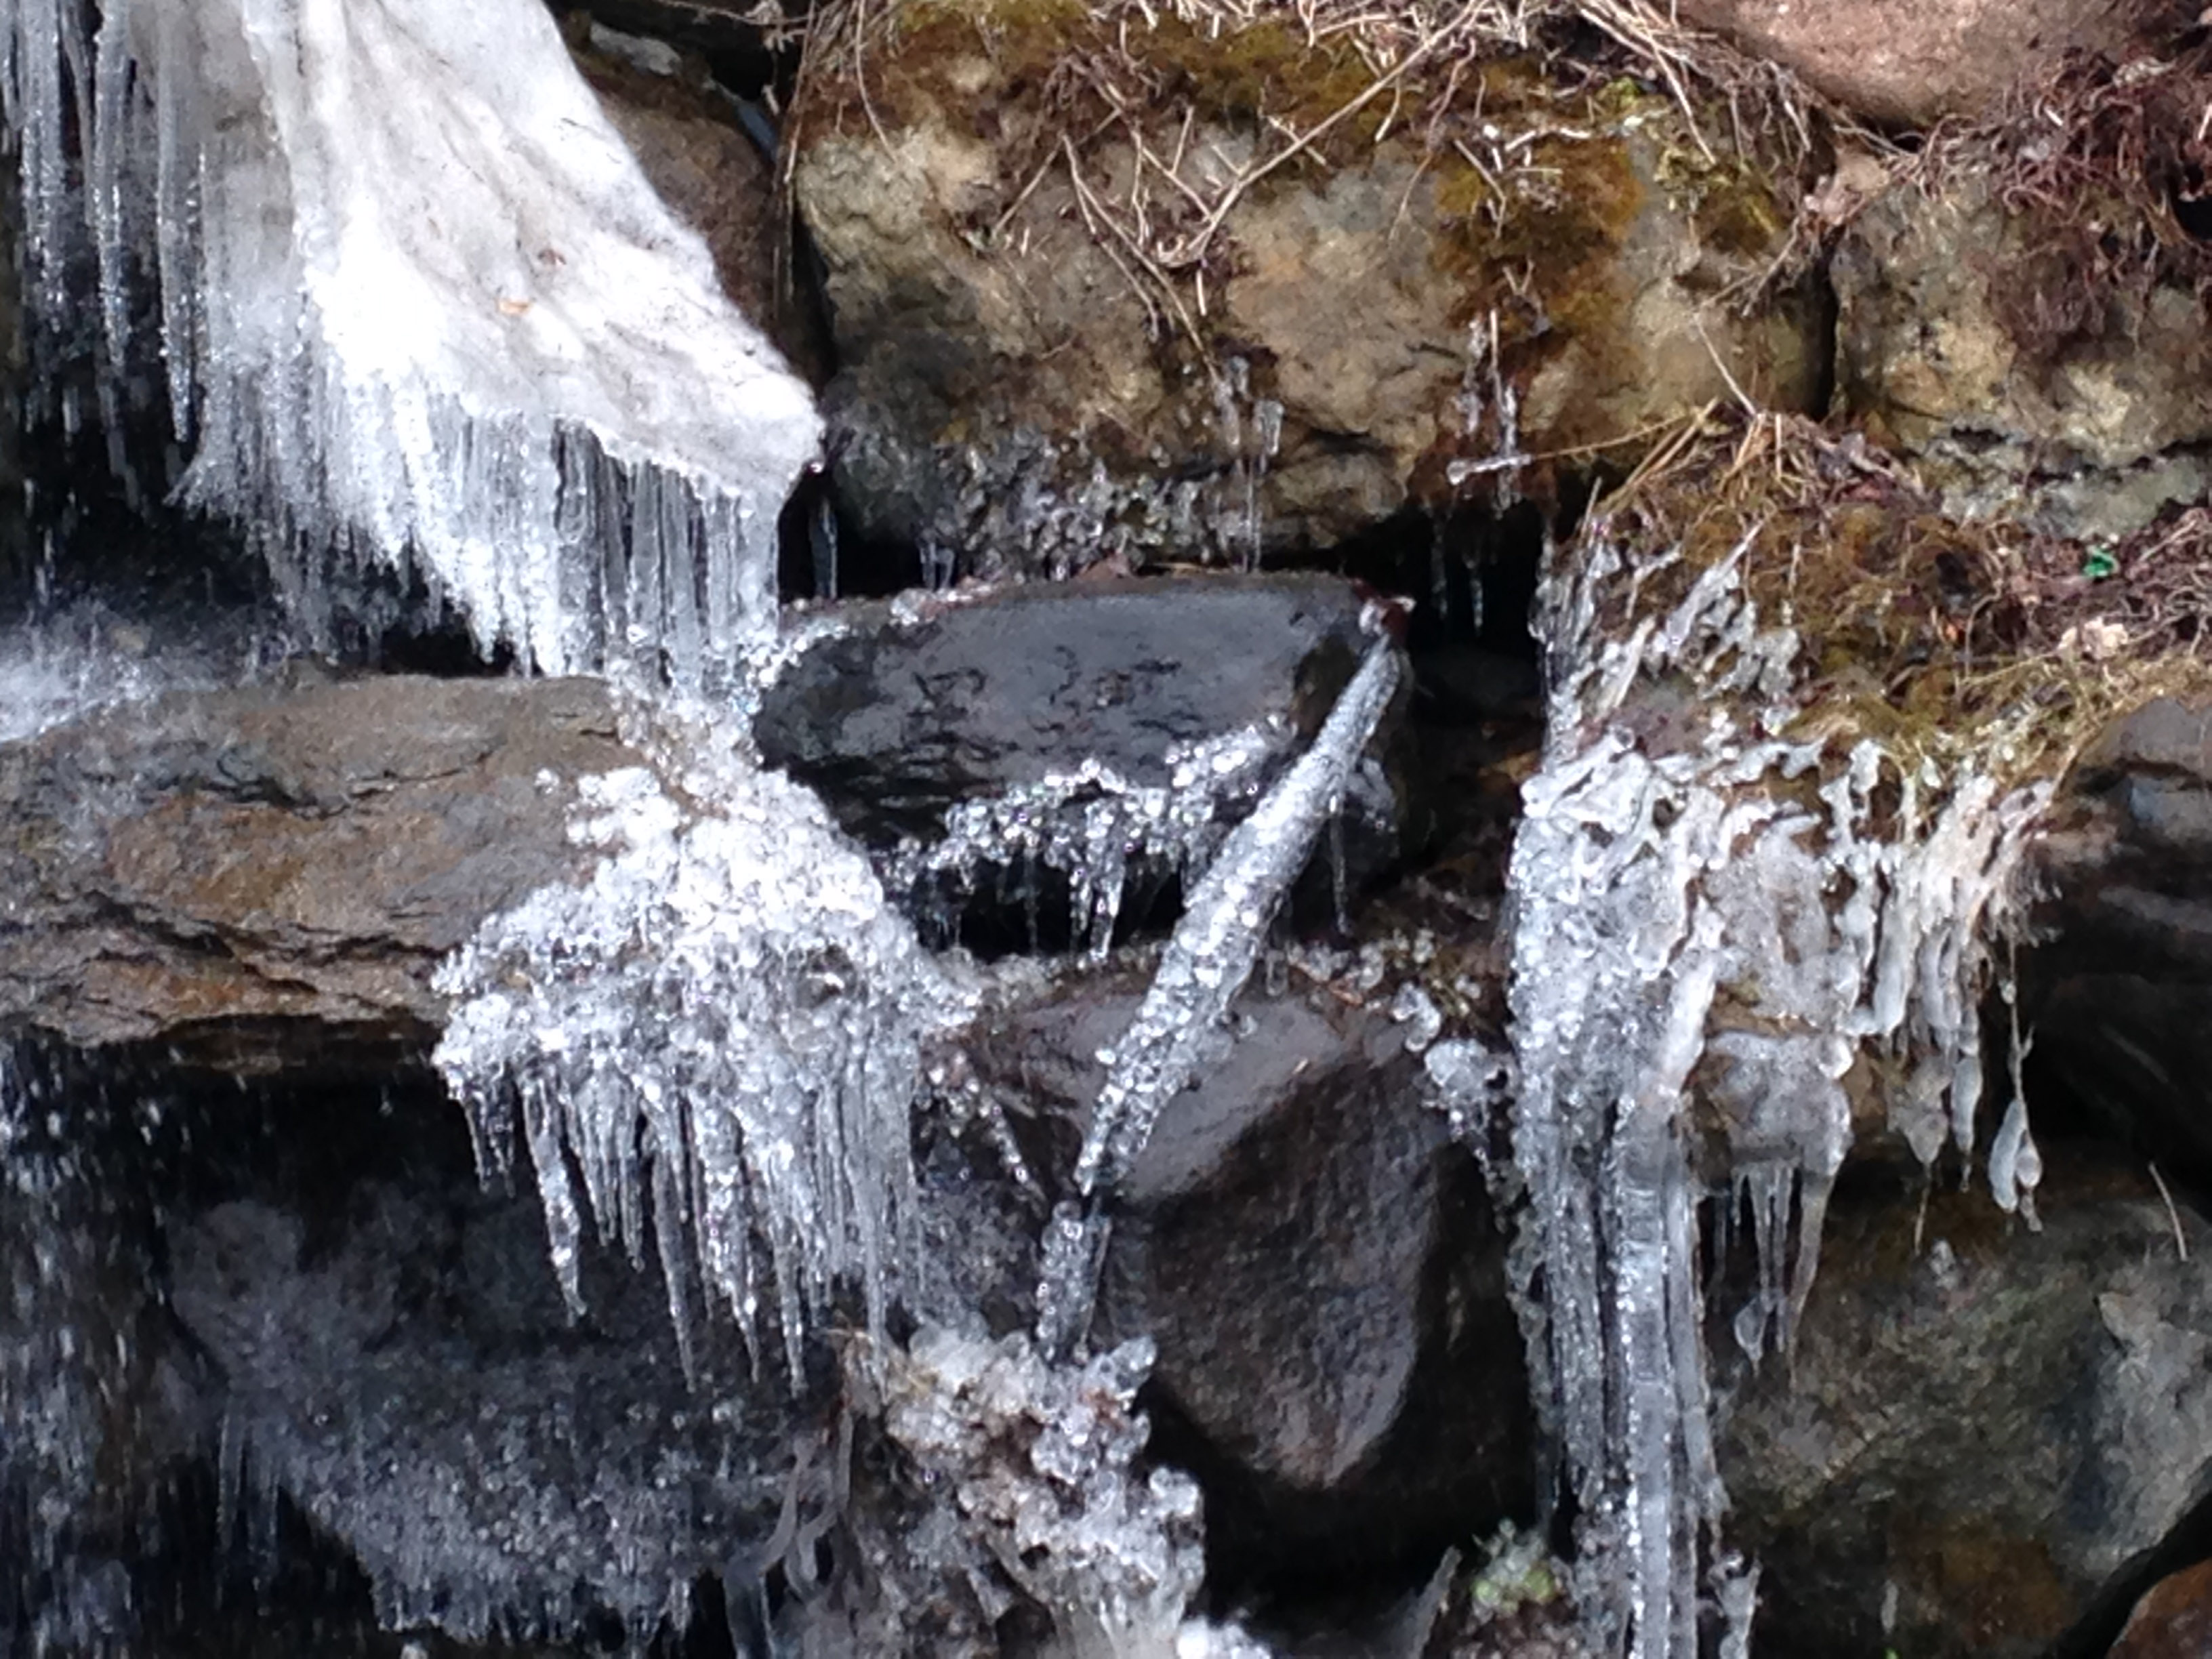 Lace made of ice decorates The Cascade.